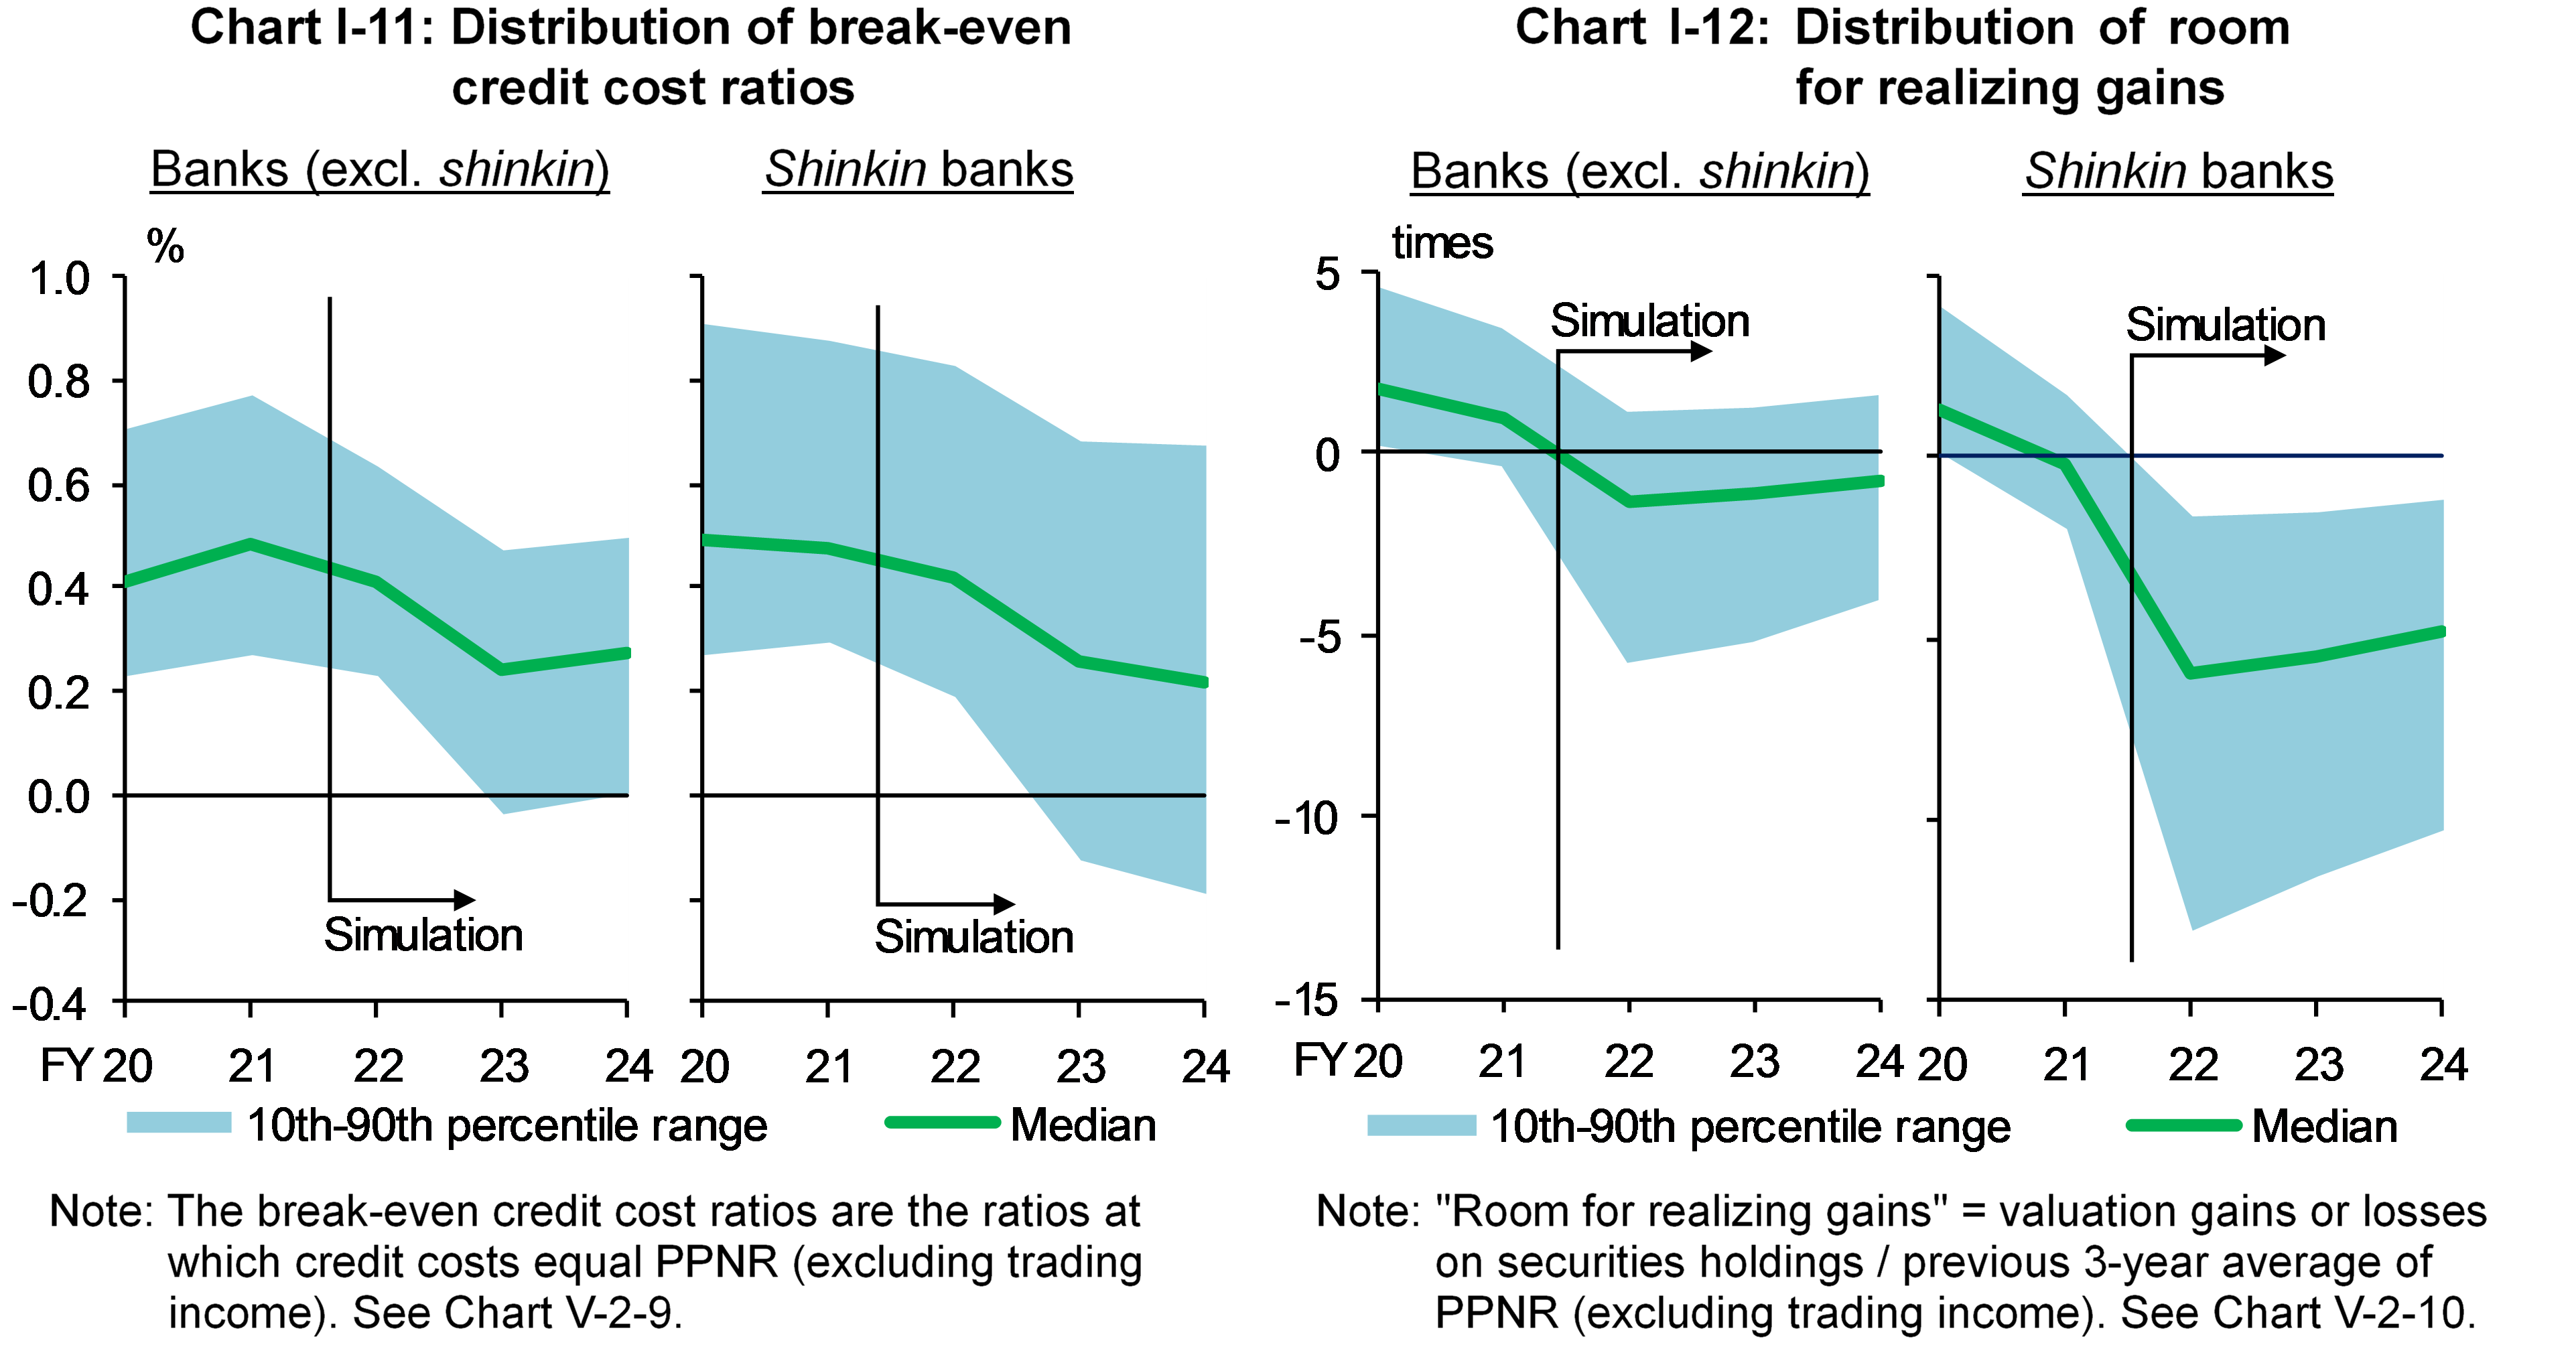 Chart I-11 shows Distribution of break-even credit cost ratios. Chart I-12 shows Distribution of room for realizing gains.